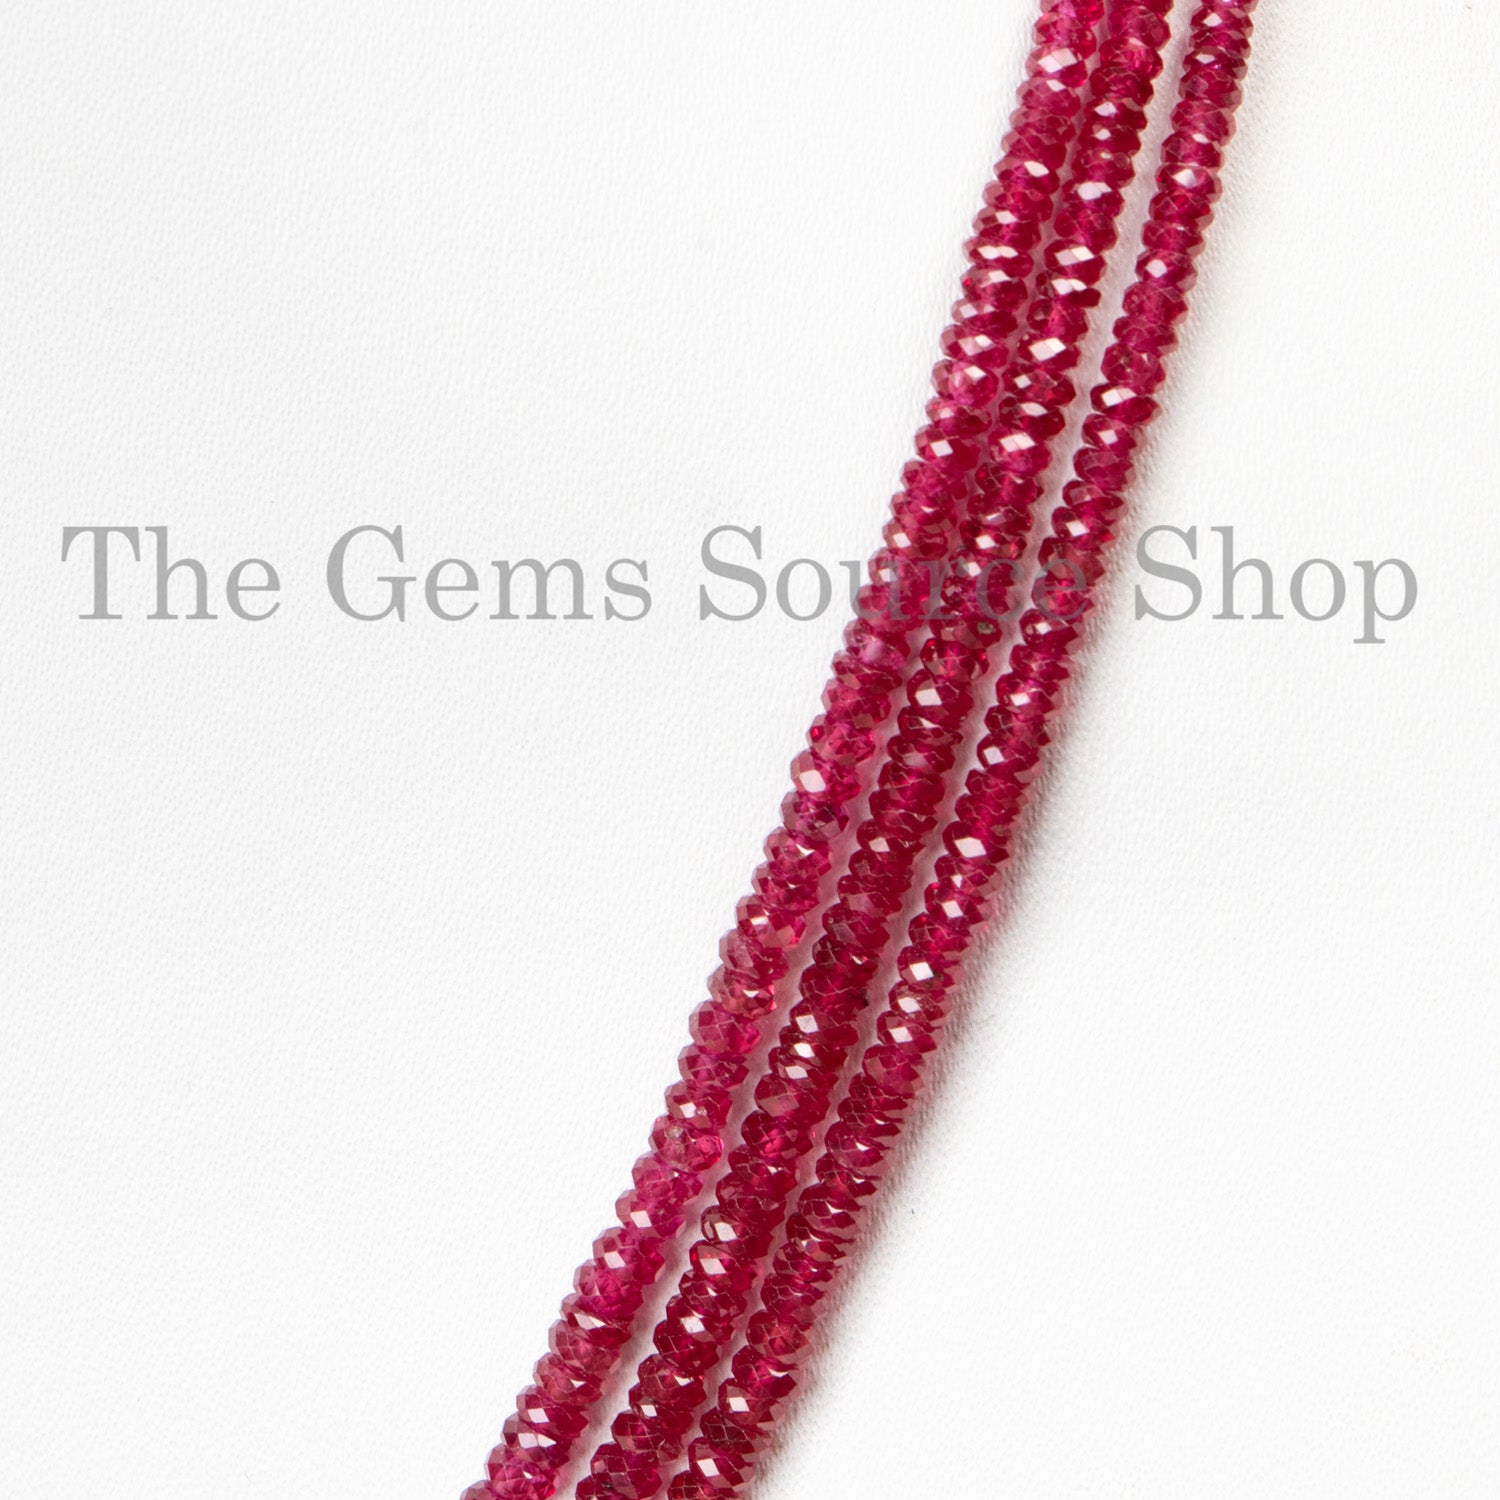 Mozambique Ruby Necklace, Faceted Rondelle Necklace, Beaded Necklace, Gemstone Necklace, Gift For Her